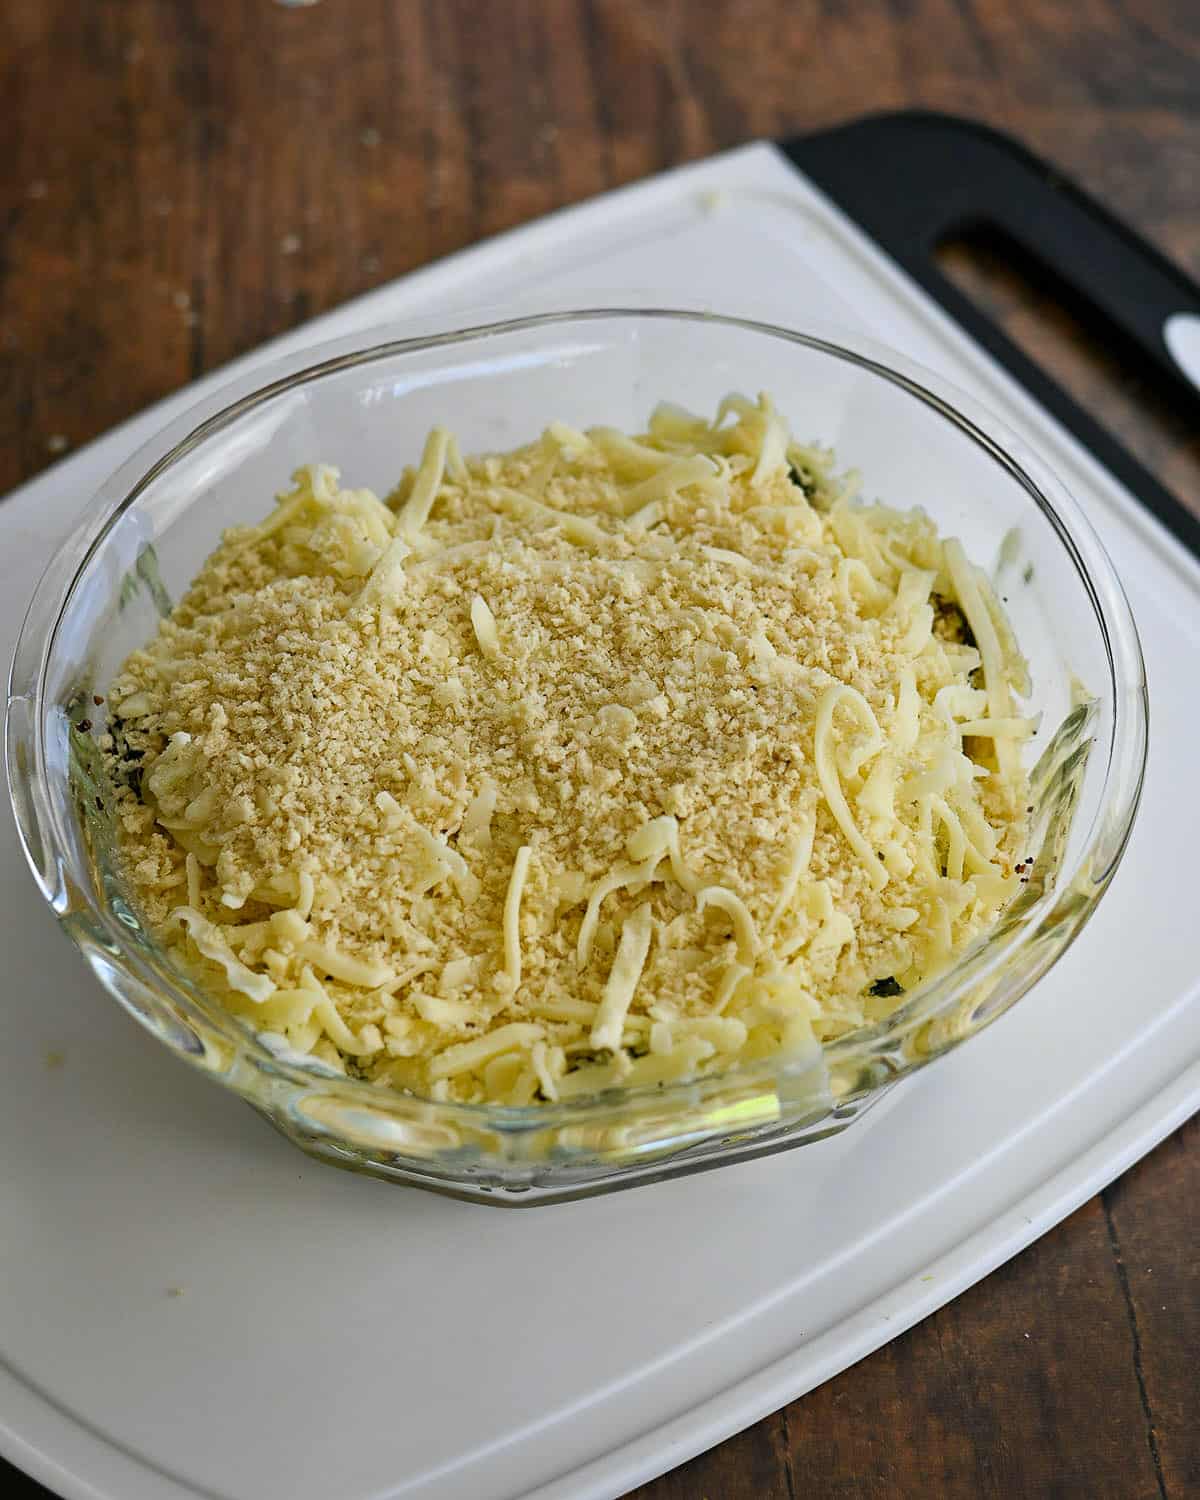 Shredded cheese and panko placed on top of zucchini and ready to bake.